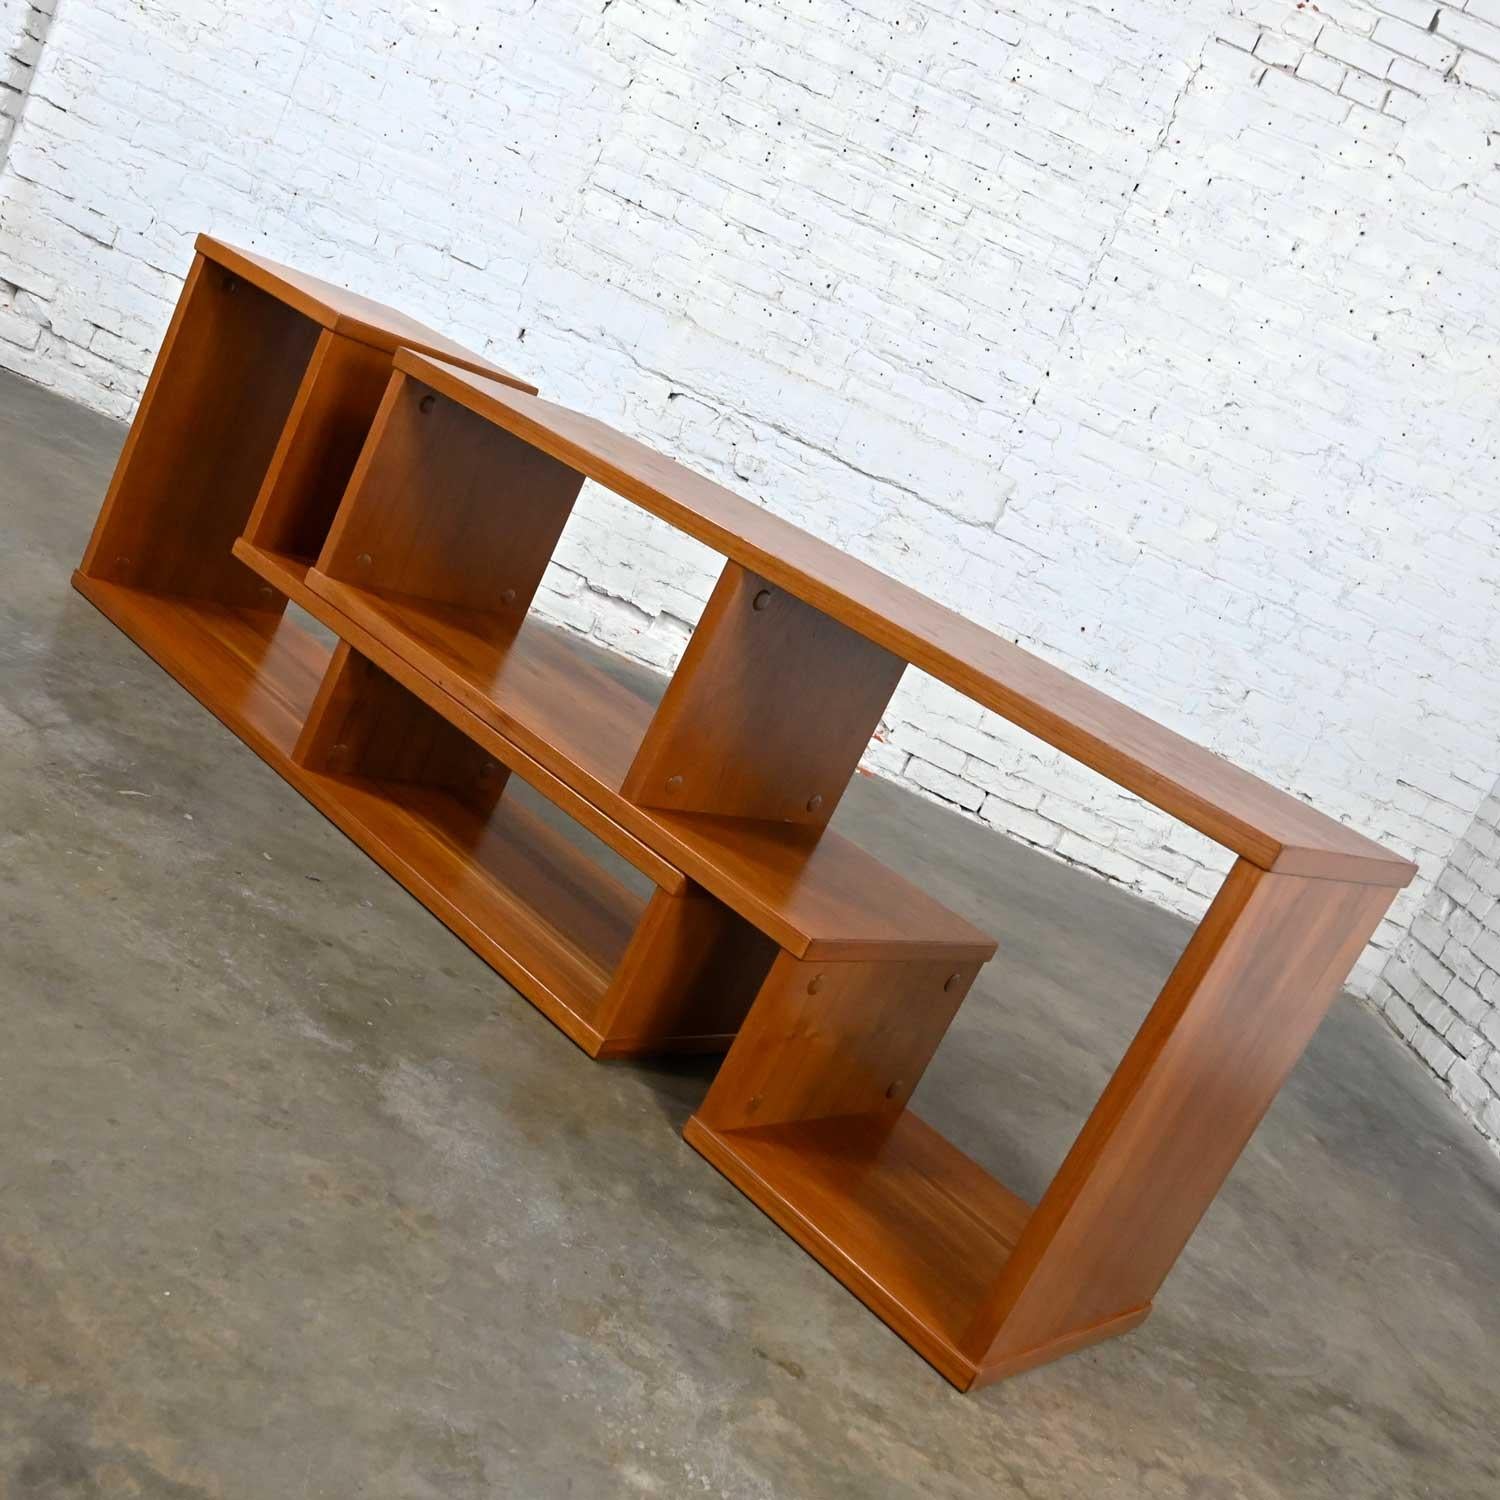 Wonderful vintage Scandinavian Modern teak veneer 2-piece adjustable low bookcase or entertainment center. Beautiful condition, keeping in mind that this is vintage and not new so will have signs of use and wear. Please see photos and zoom in for